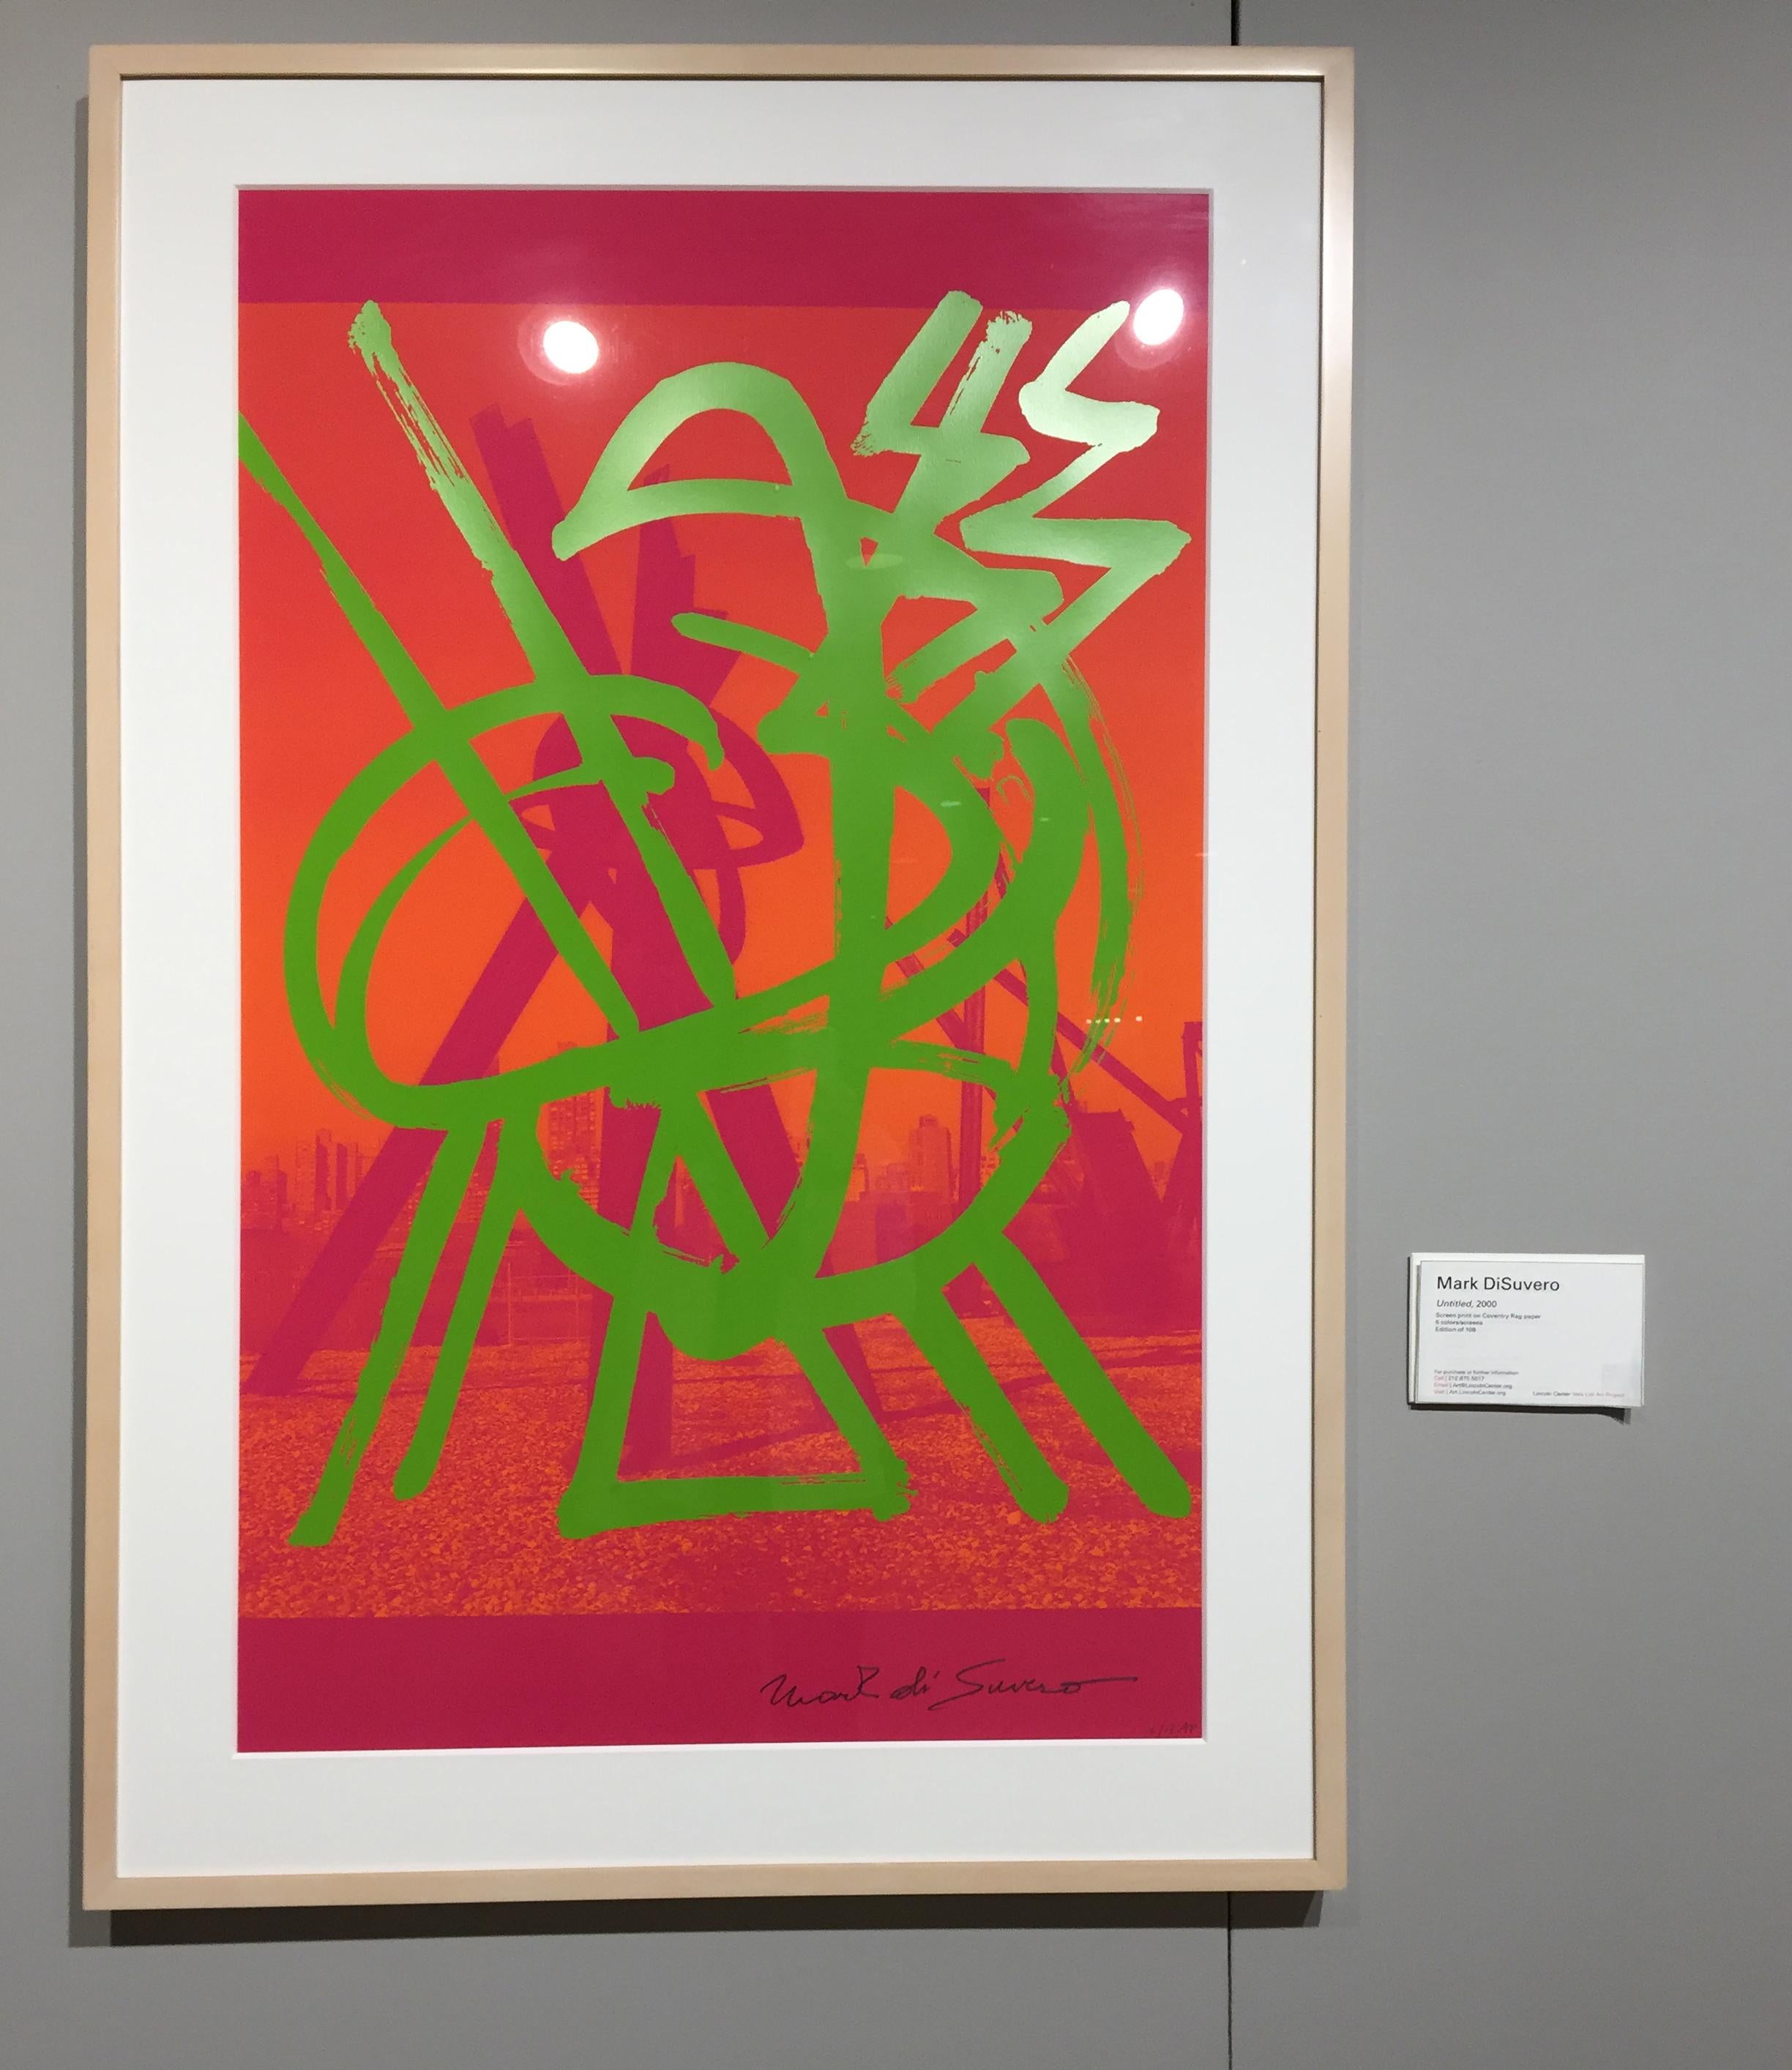 Untitled, Pink and Orange screenprint - Abstract Print by Mark di Suvero